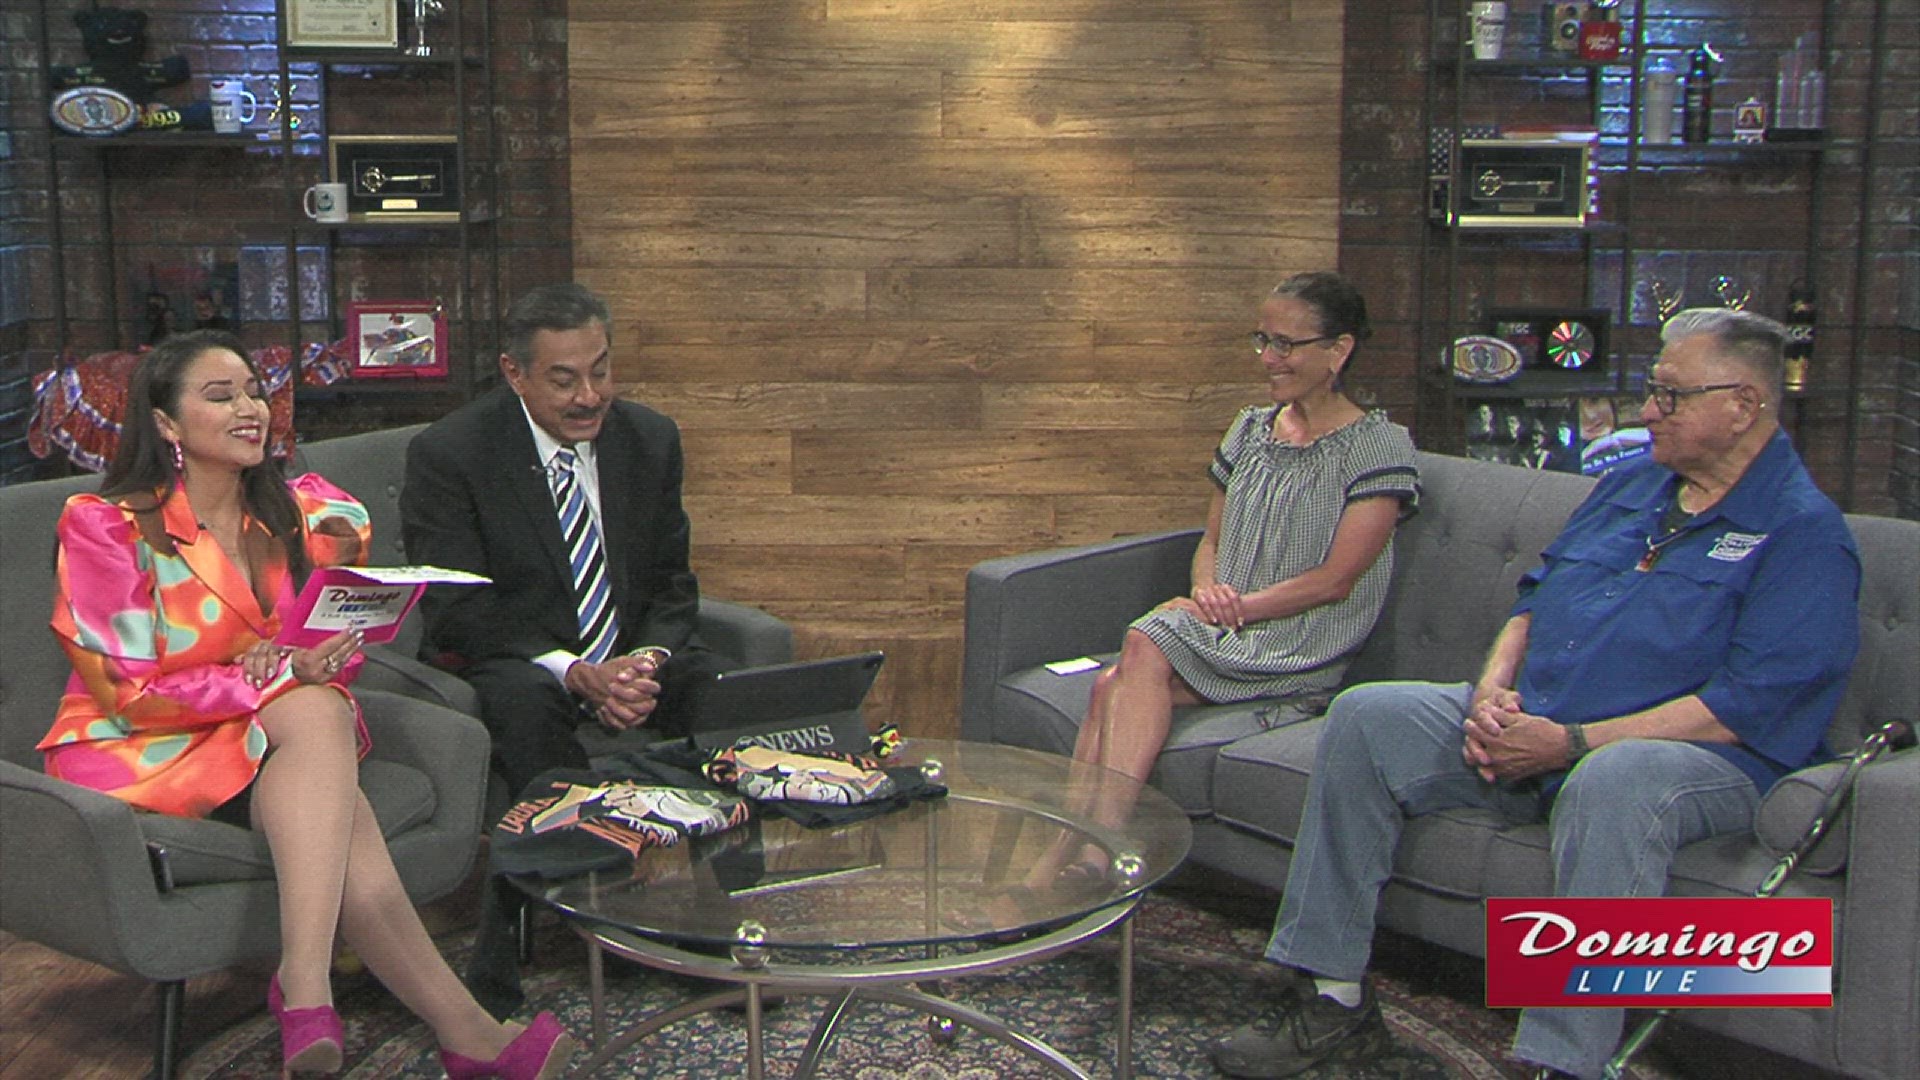 Nueces County Comm'r Joe A. Gonzalez and West Oso ISD Superintendent Kimberly Moore joined us on Domingo Live to discuss Operation Health & Wellness' pop-up clinics.